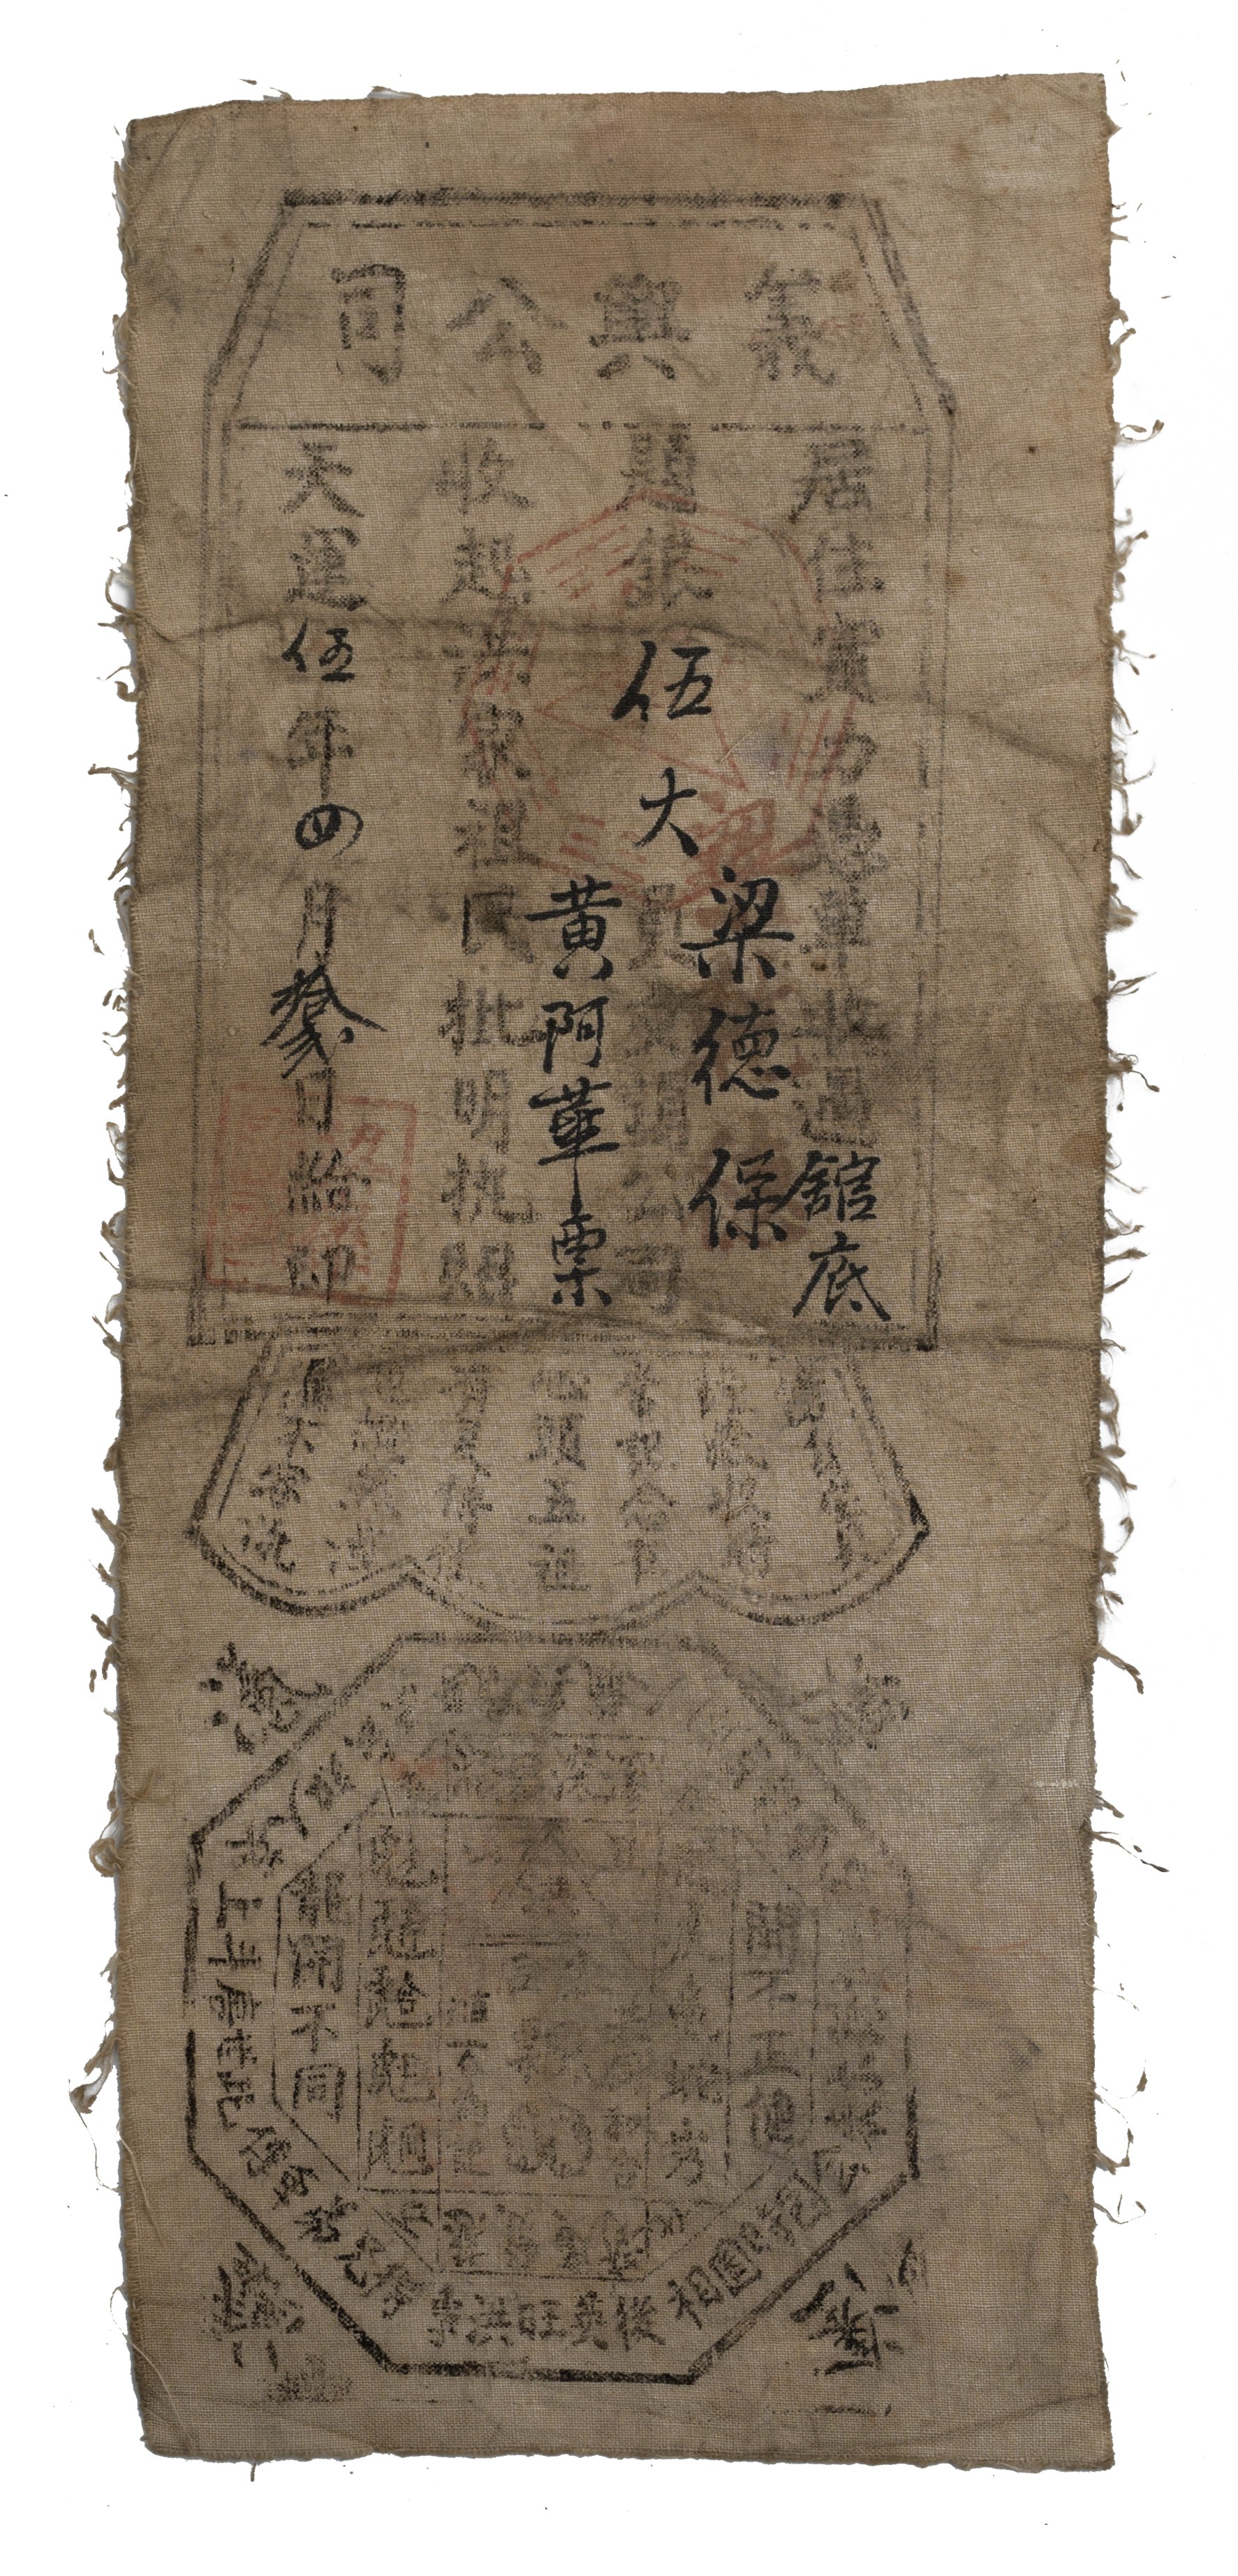 AN IMPORTANT AND RARE CHINESE TEXTILE DOCUMENT, YIXING GONGSI. A certificate or diploma for the